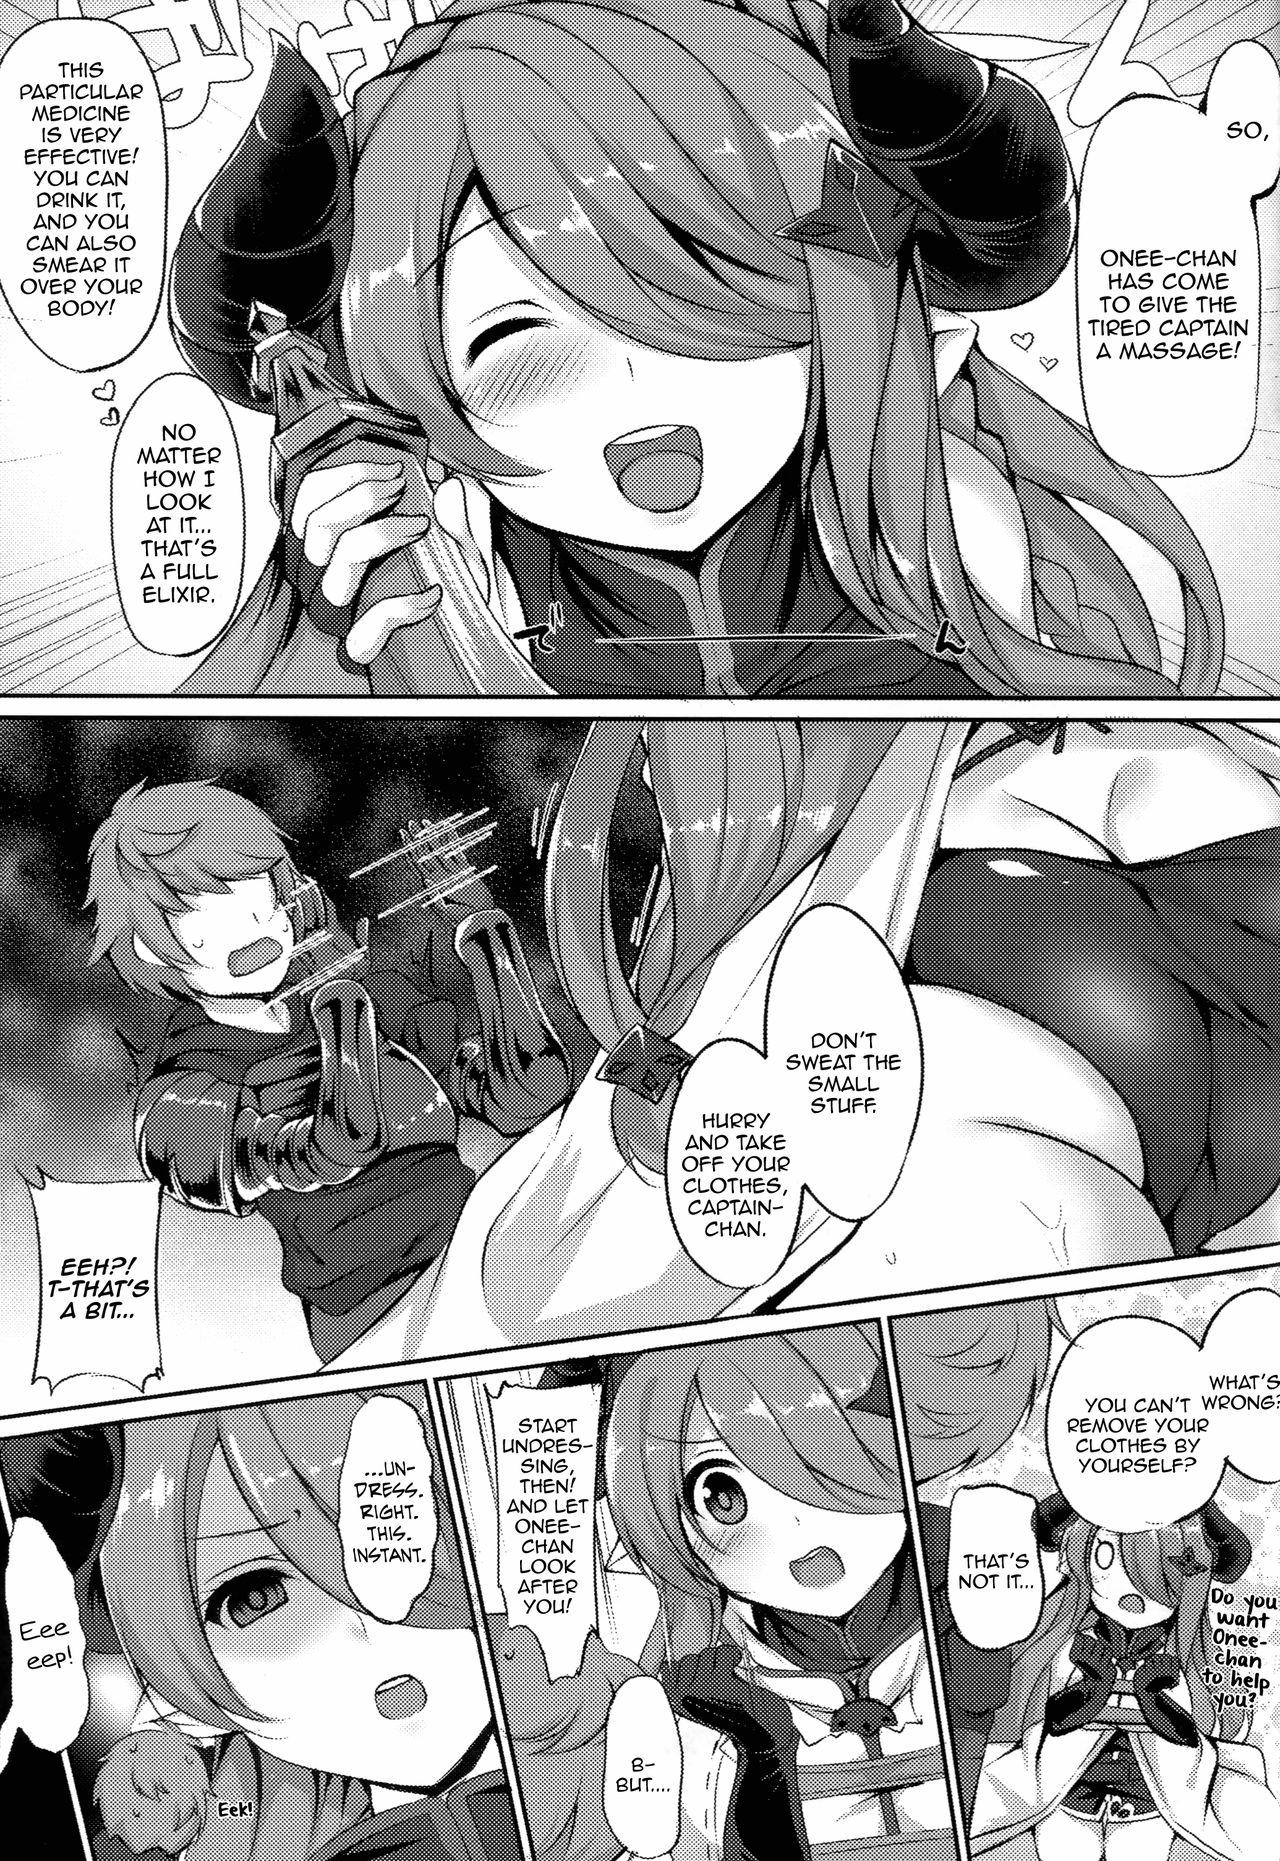 (C94) [BENIKURAGE (circussion)] Captain-chan! You Look so Tired Today, How About a Special Massage From Onee-san? (Granblue Fantasy) [English] [Aoitenshi] 5